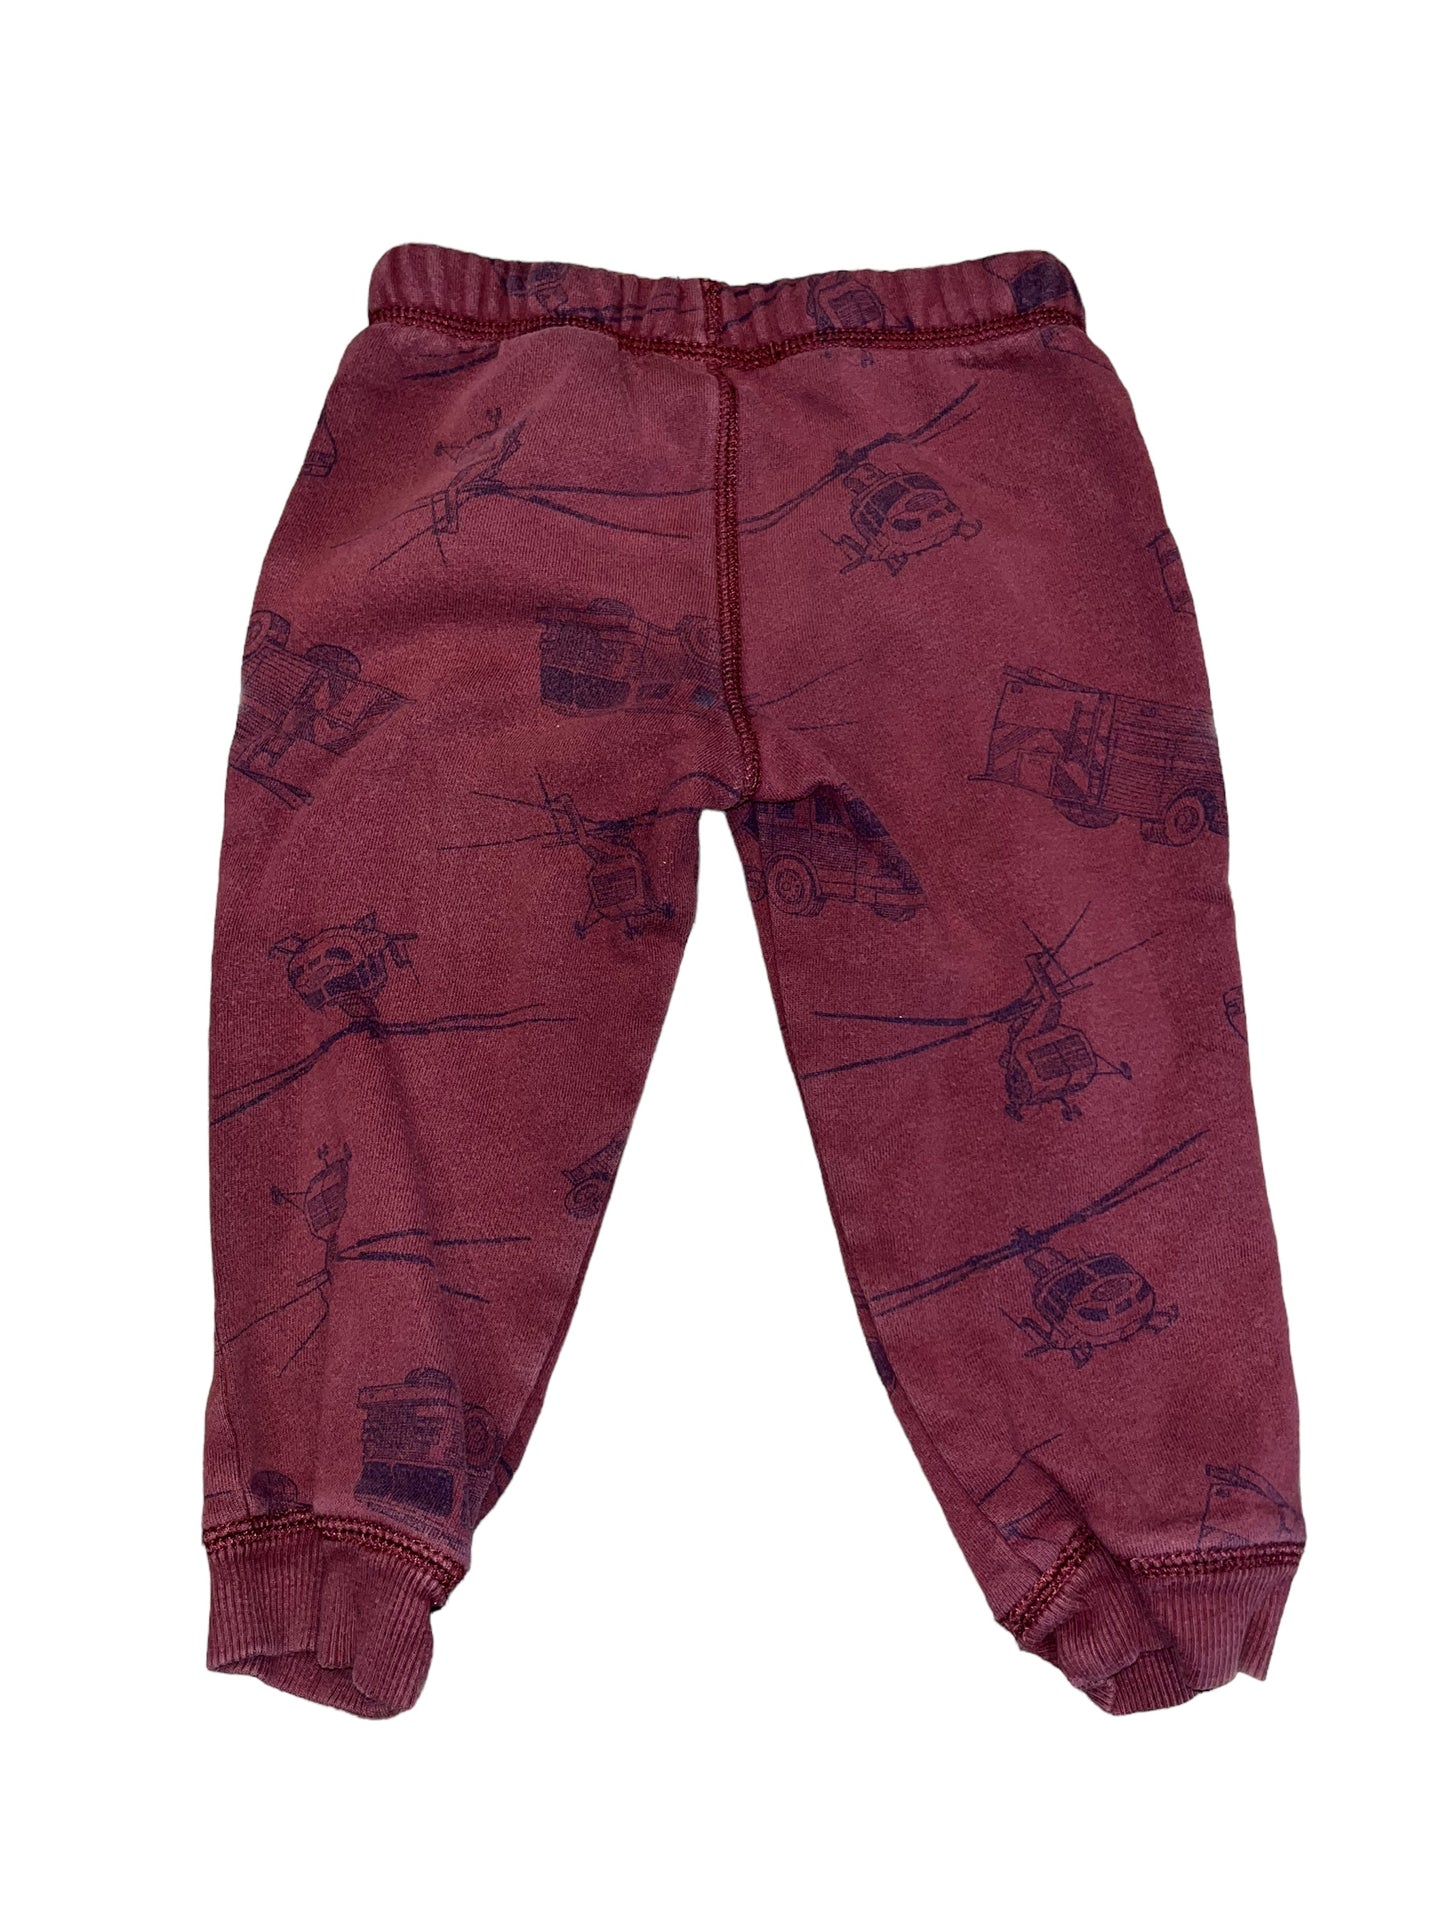 Carters Bottoms 3T